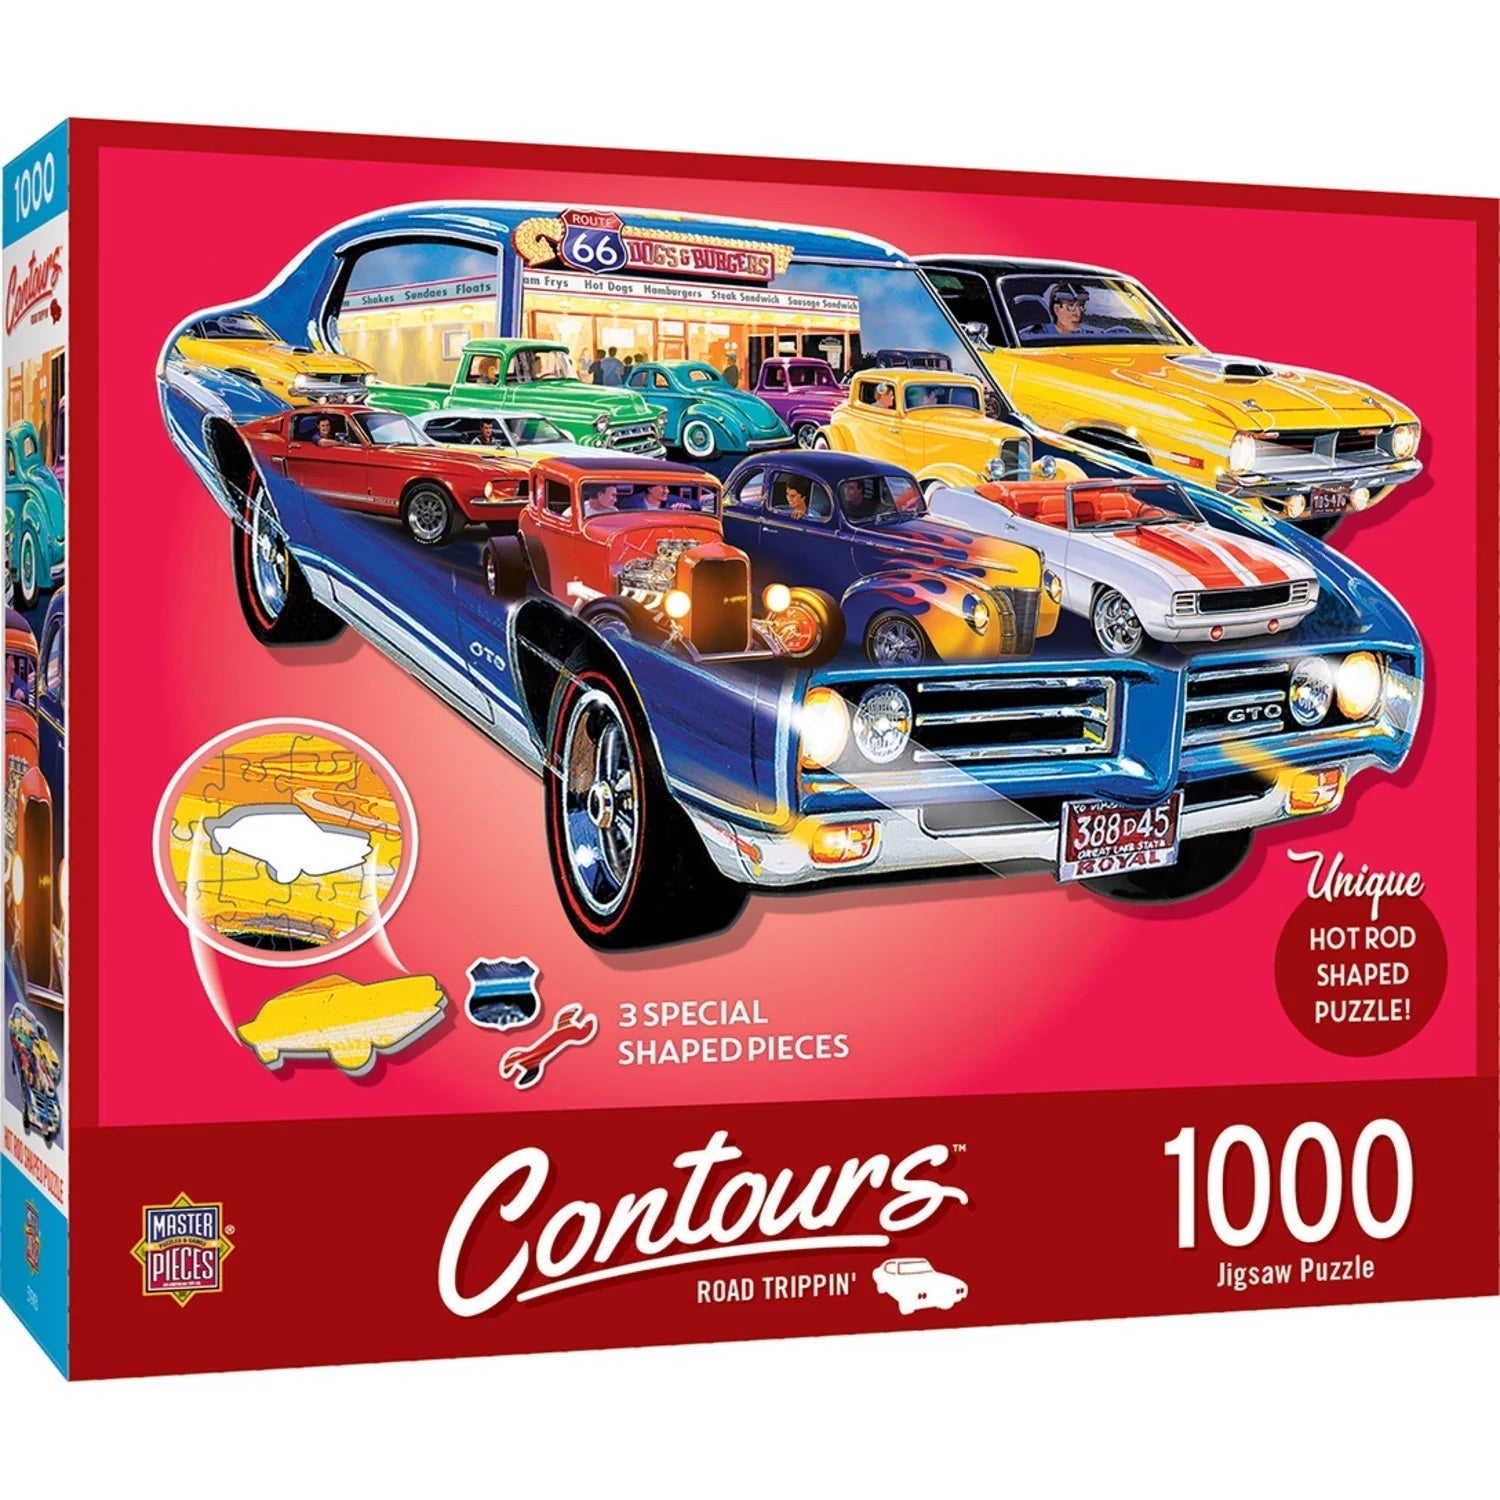  CONTOURS - ROAD TRIPPIN - 1000 PIECE SHAPED JIGSAW PUZZLE